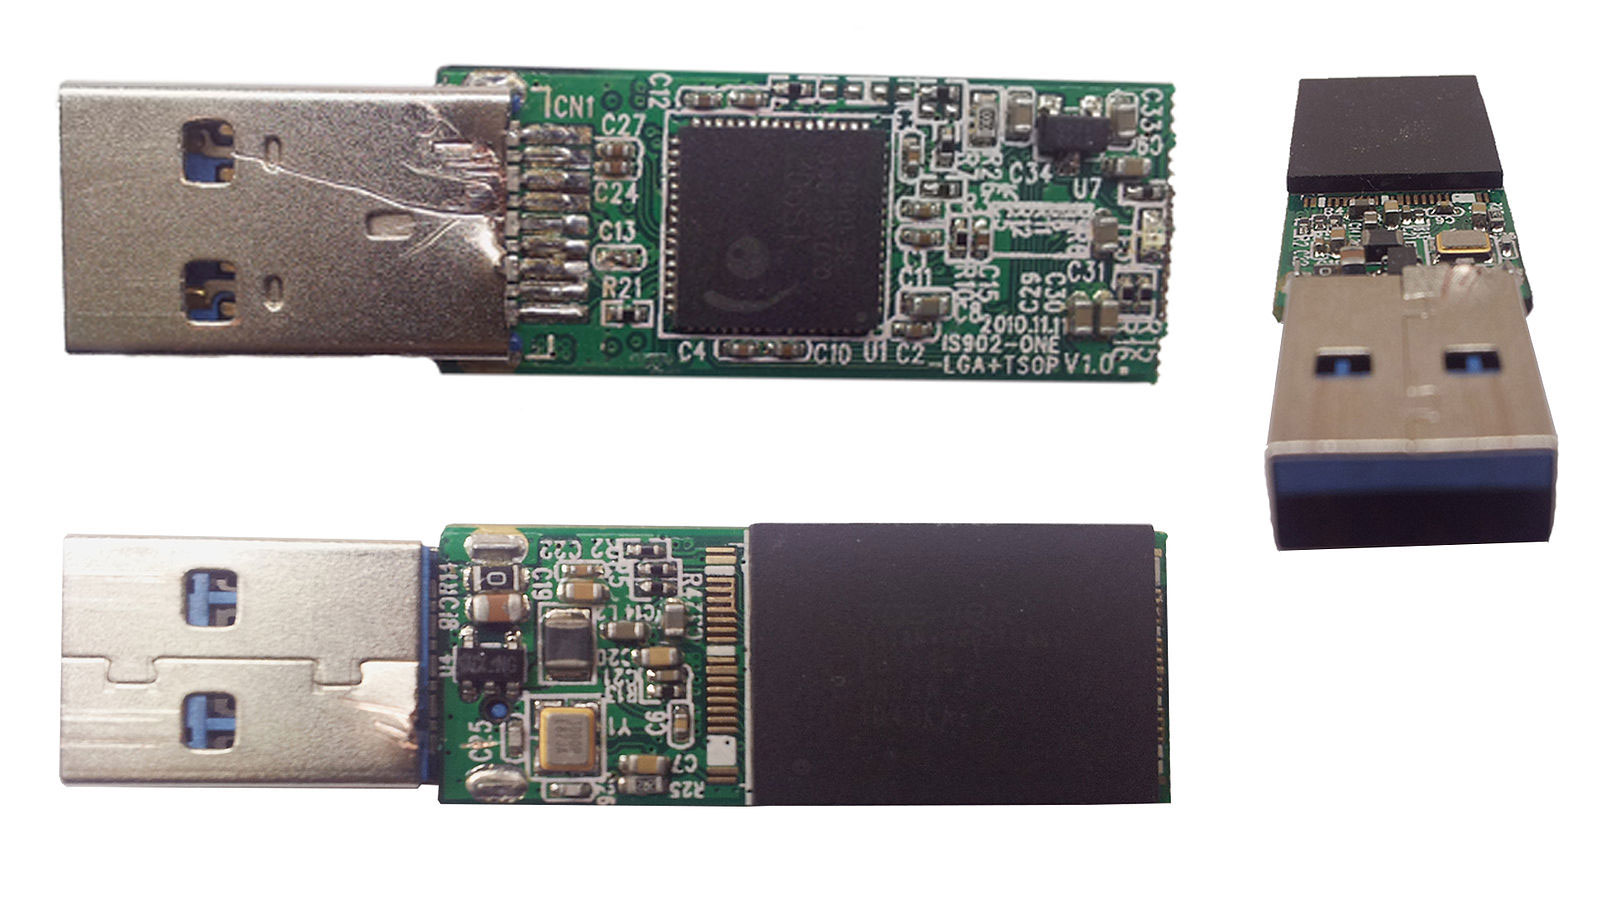 The connector and PCB of a USB 3.0 flash drive